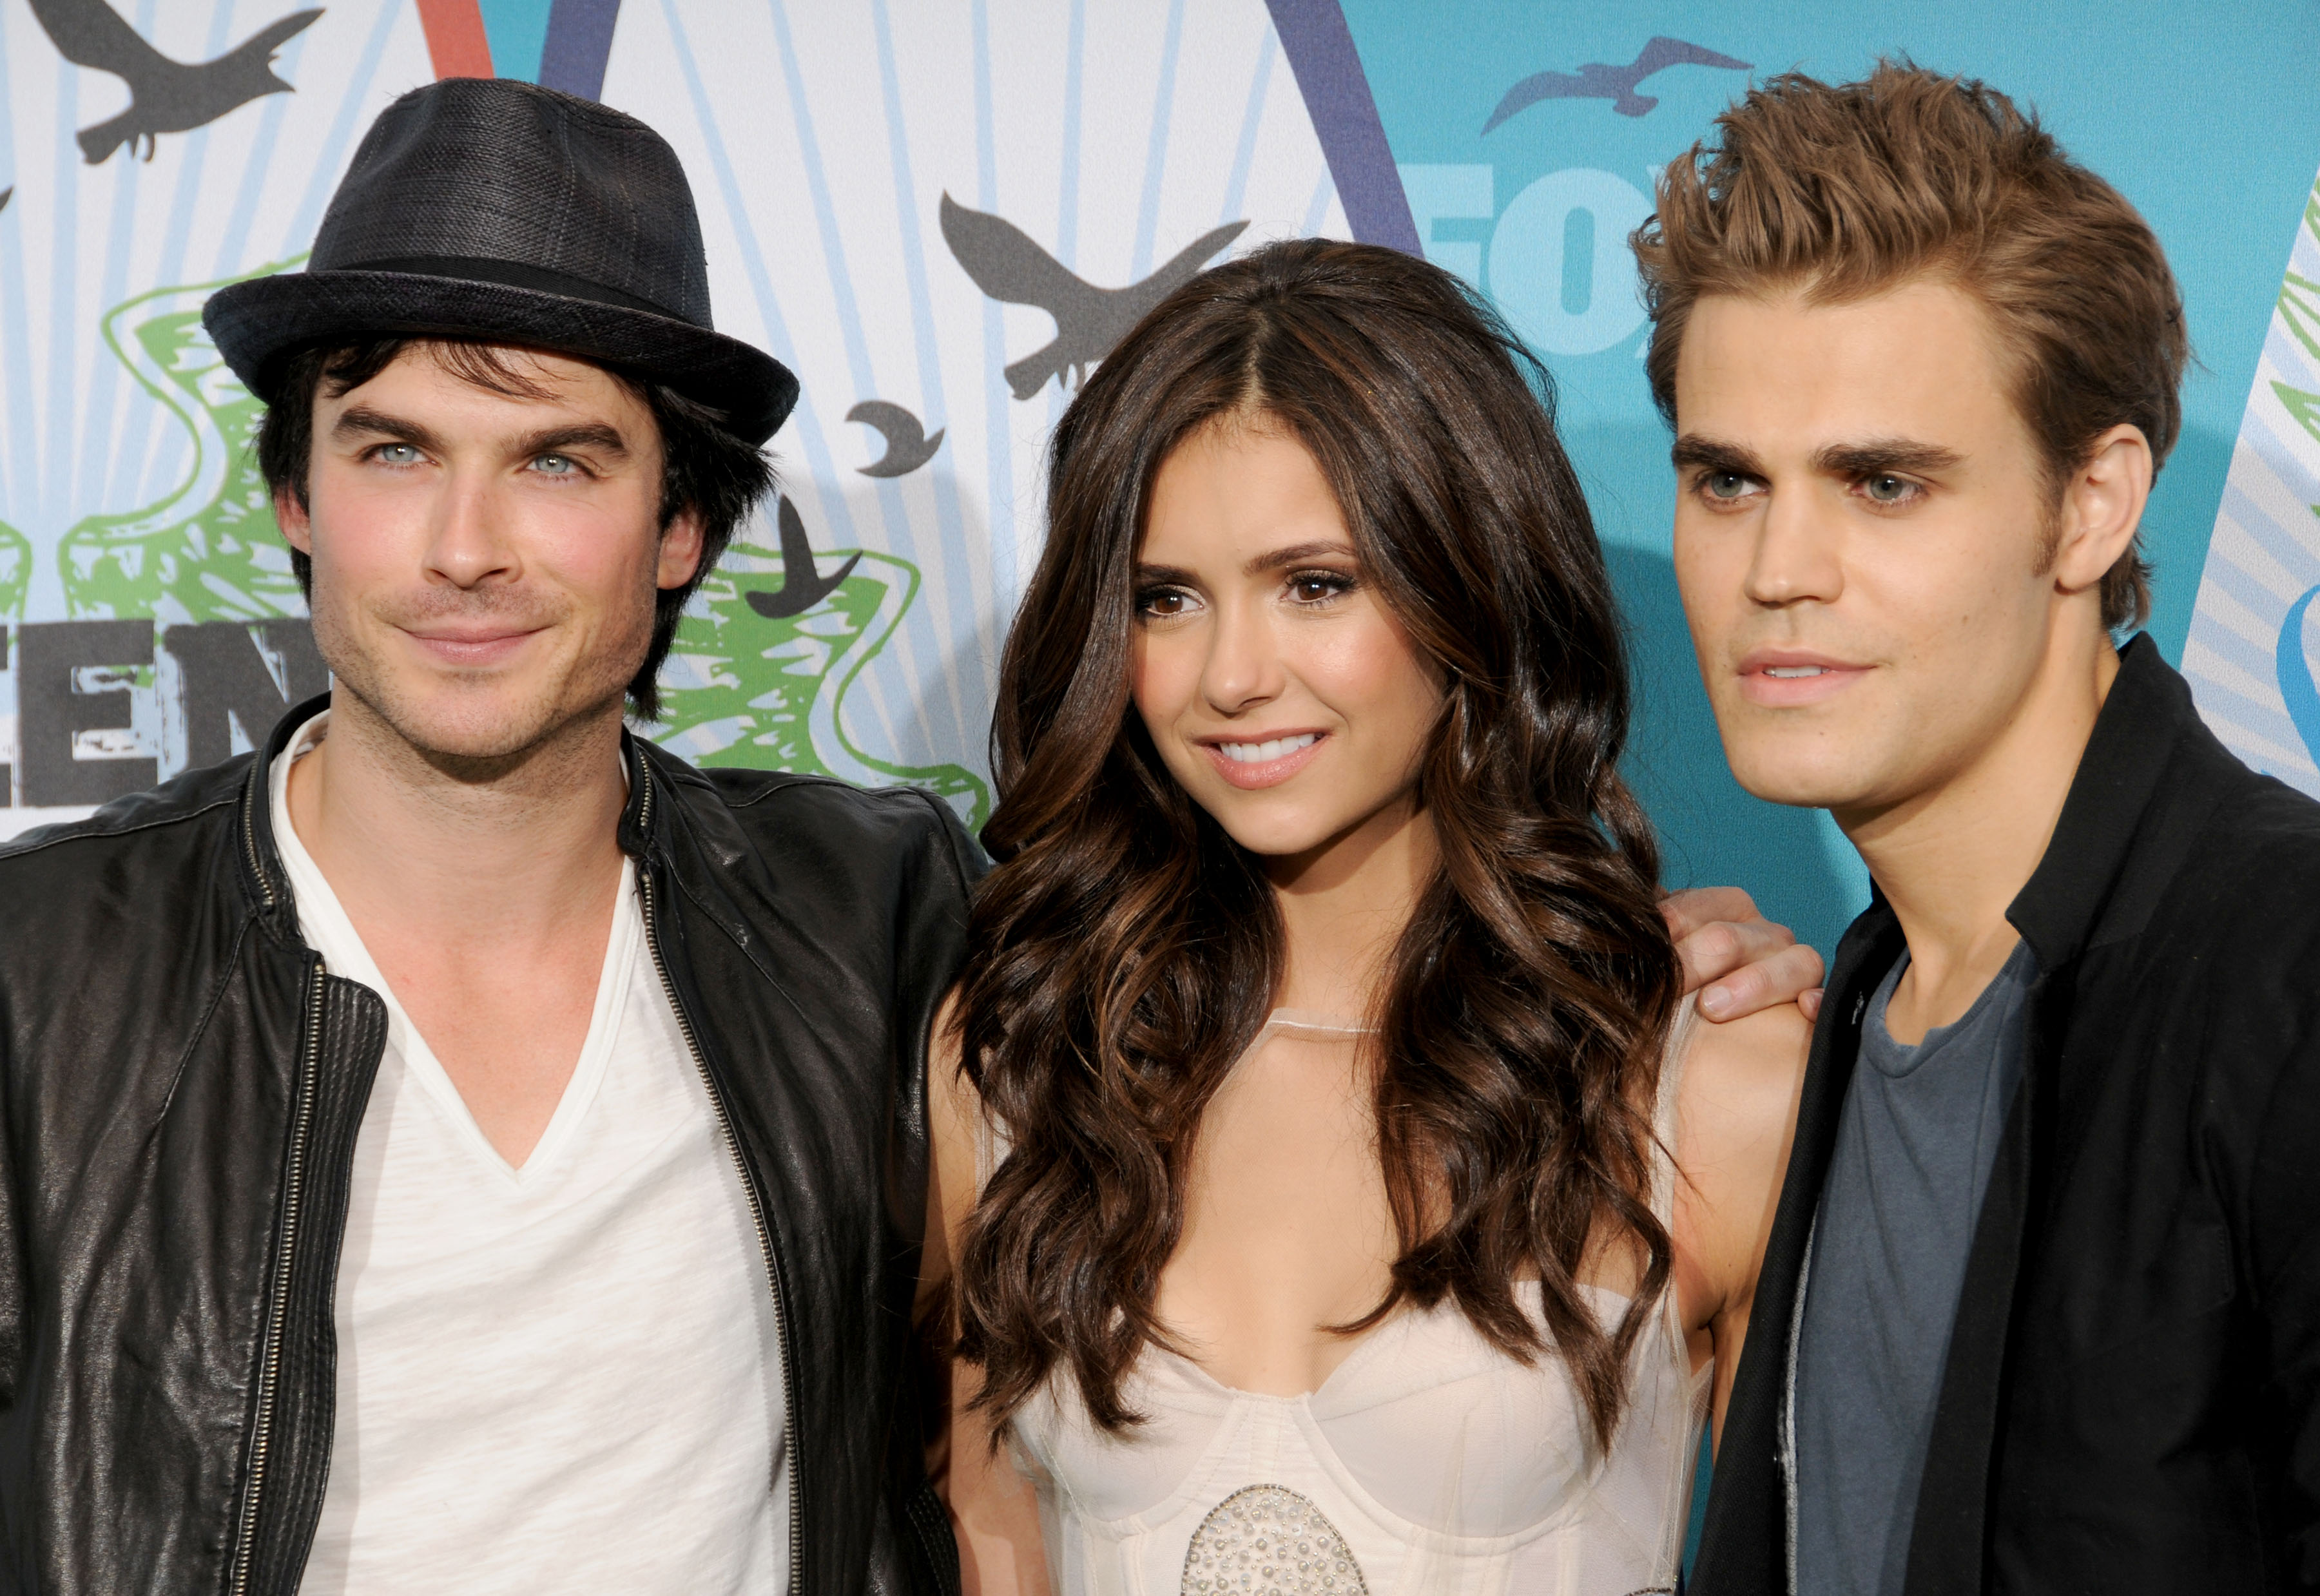 Ian Somerhalder, Nina Dobrev, and Paul Wesley of "The Vampire Diaries" at the press room for Teen Choice 2010 on August 8, 2010, in California. | Source: Getty Images